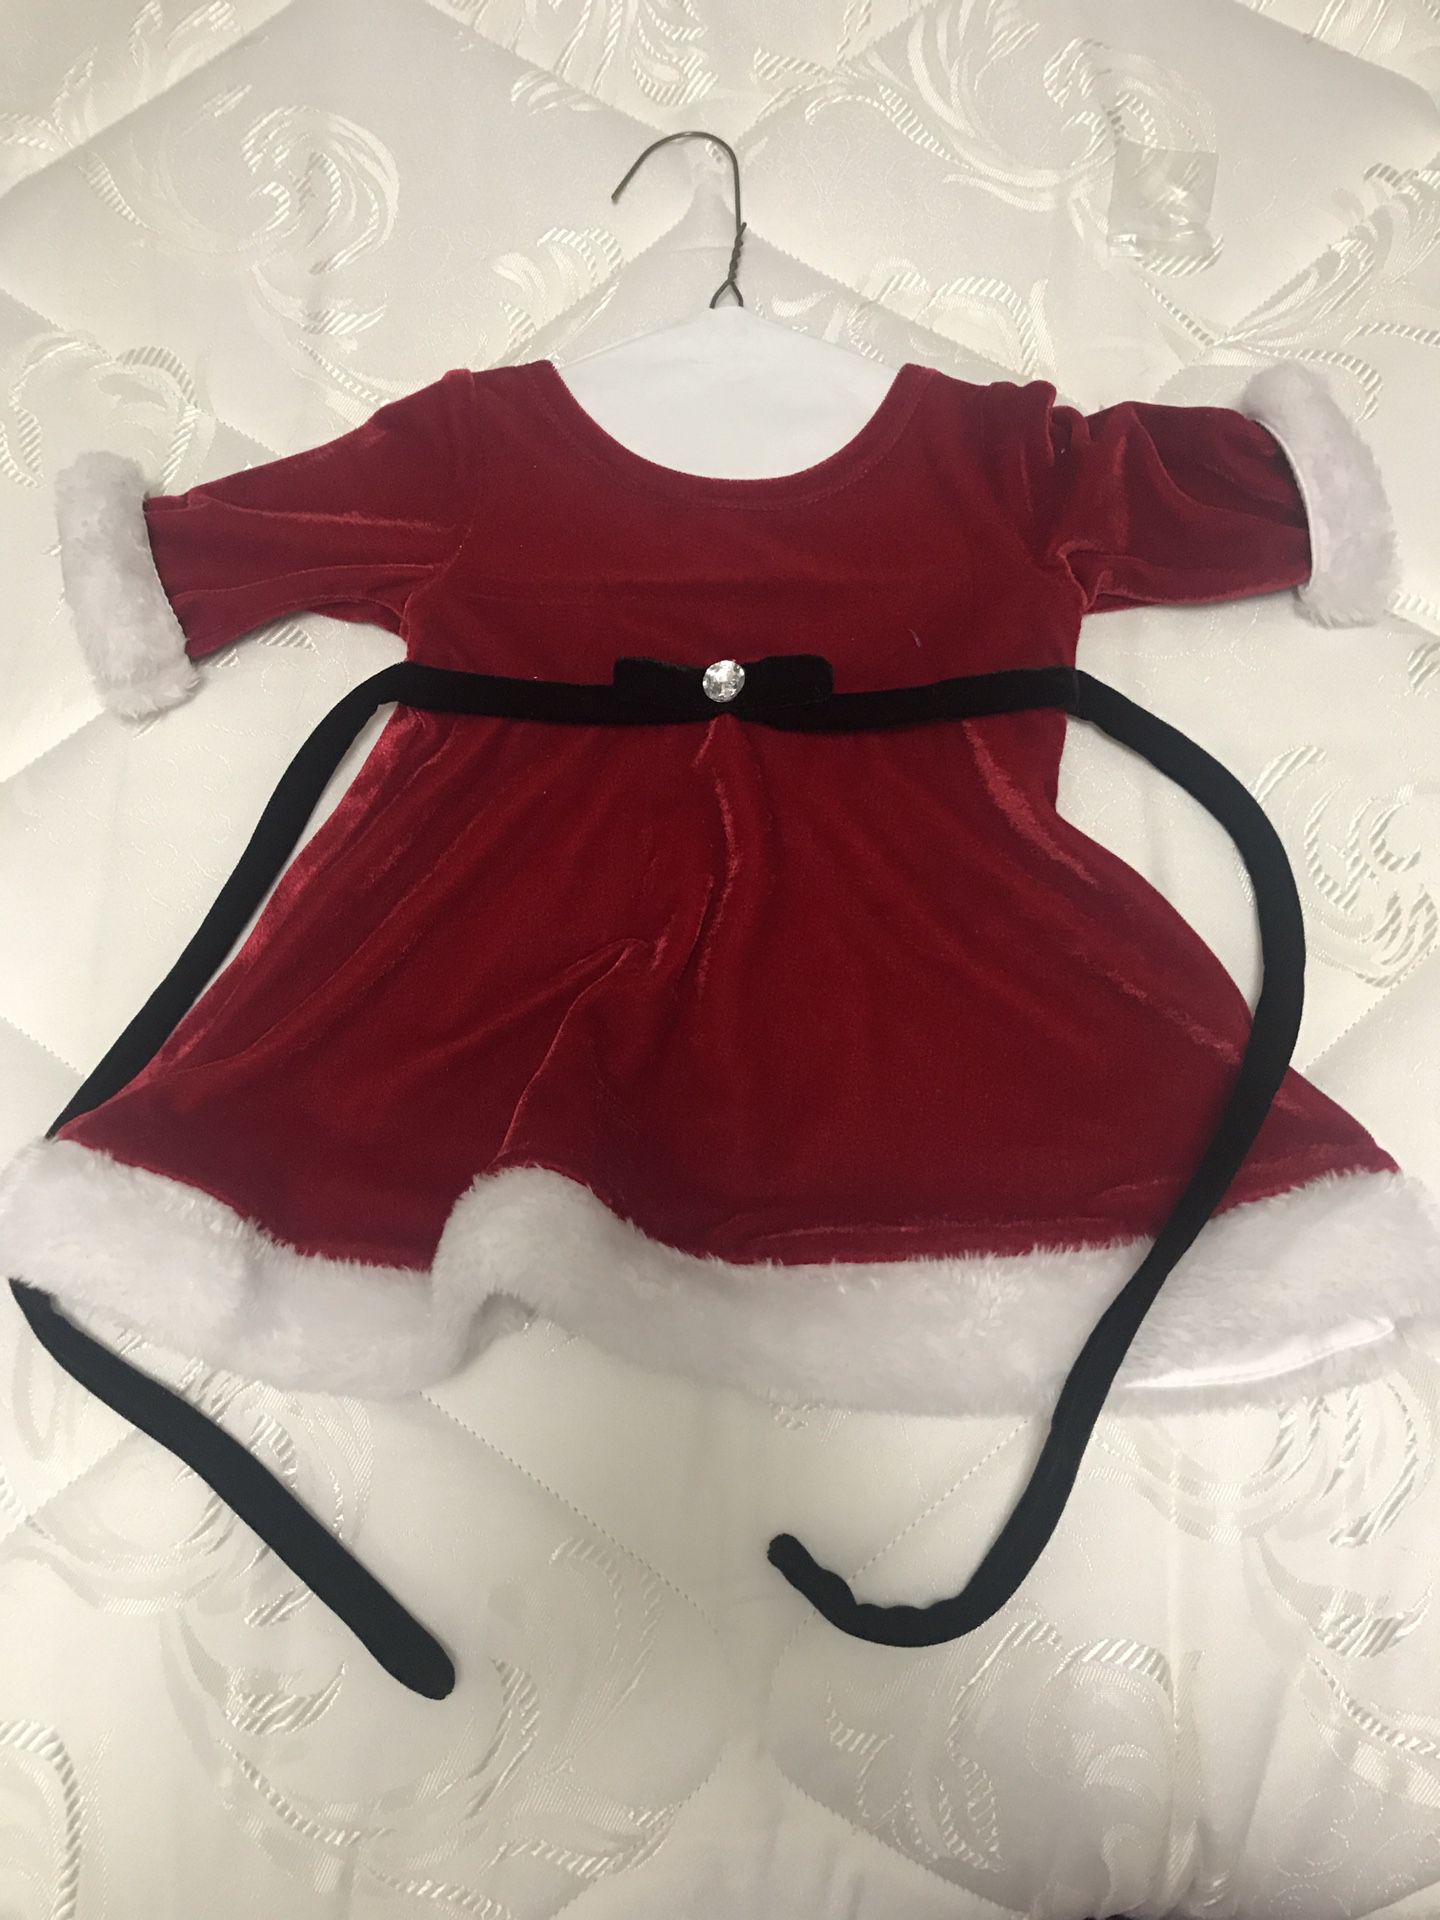 Christmas Dress 3-6 month old baby girl